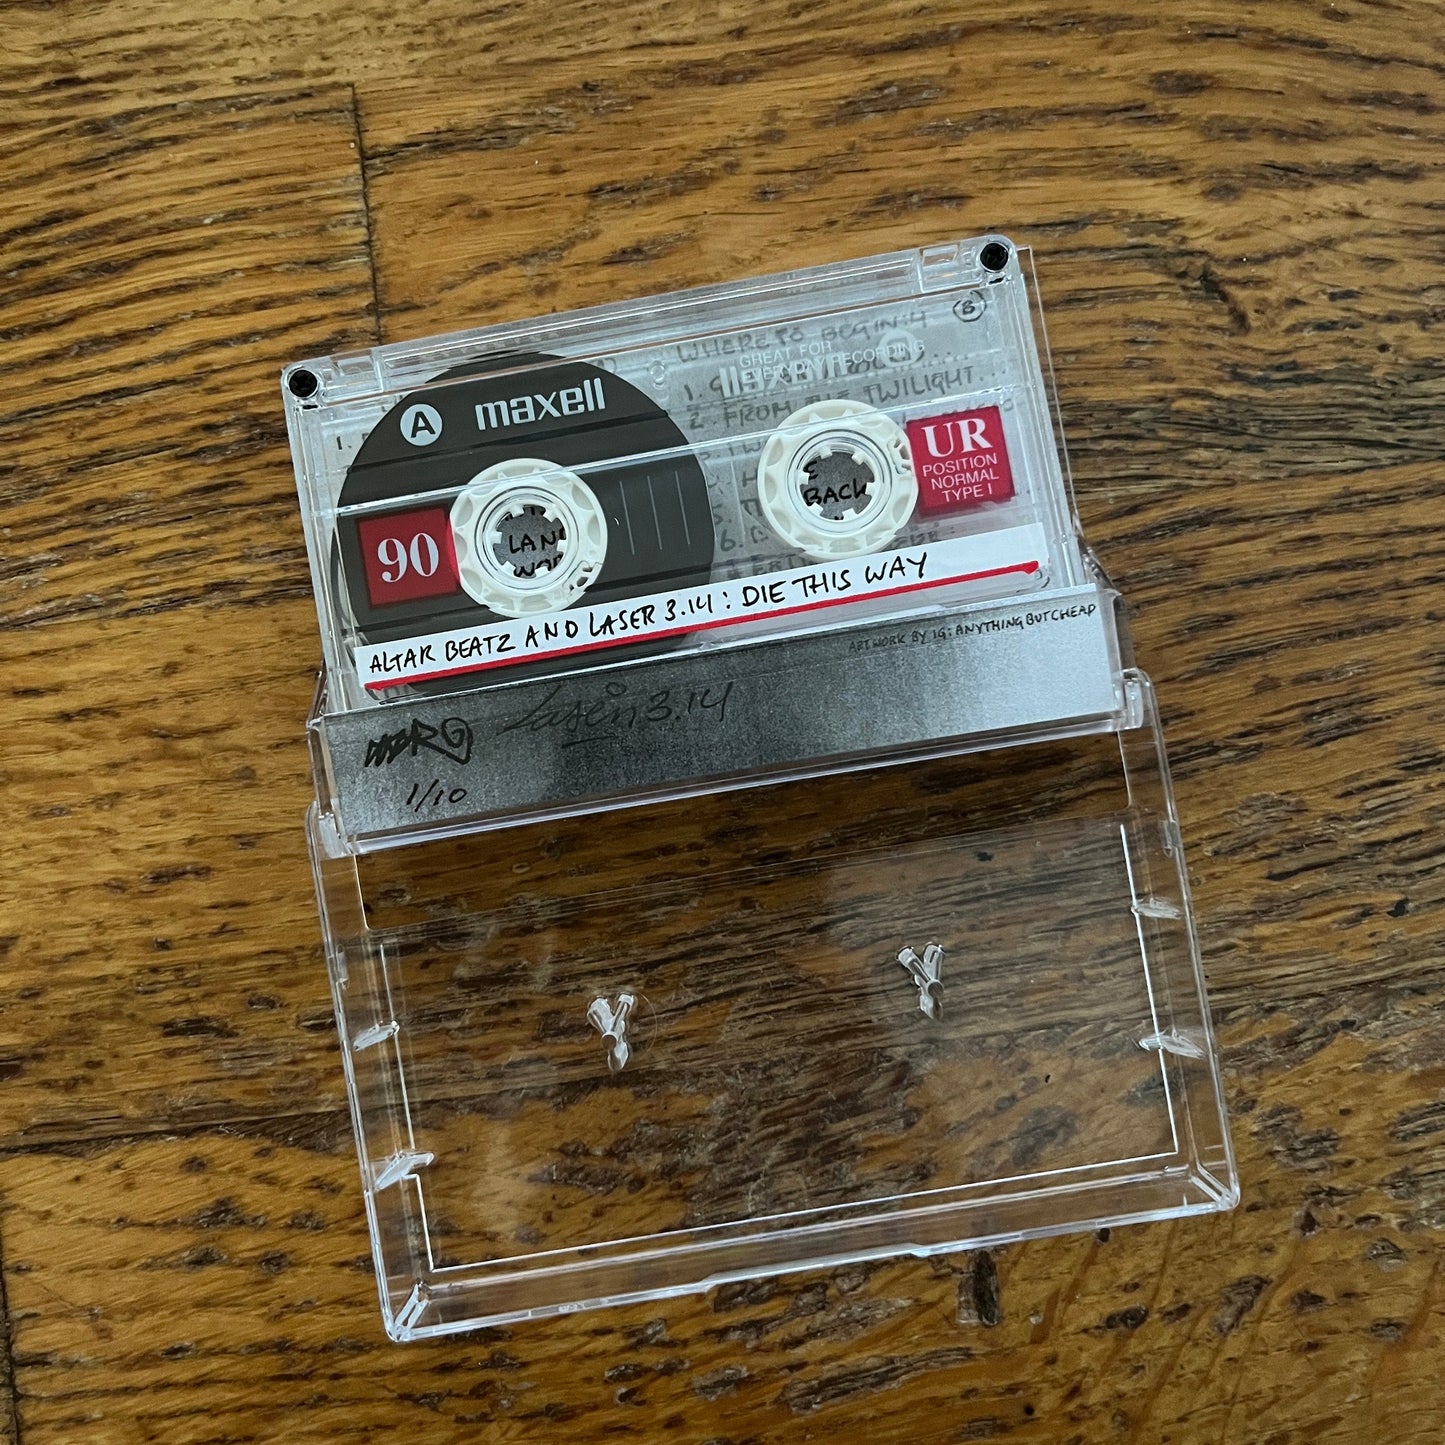 DIY Cassette Tape by Altar Beatz and Laser 3.14 - DIE THIS WAY 5/10